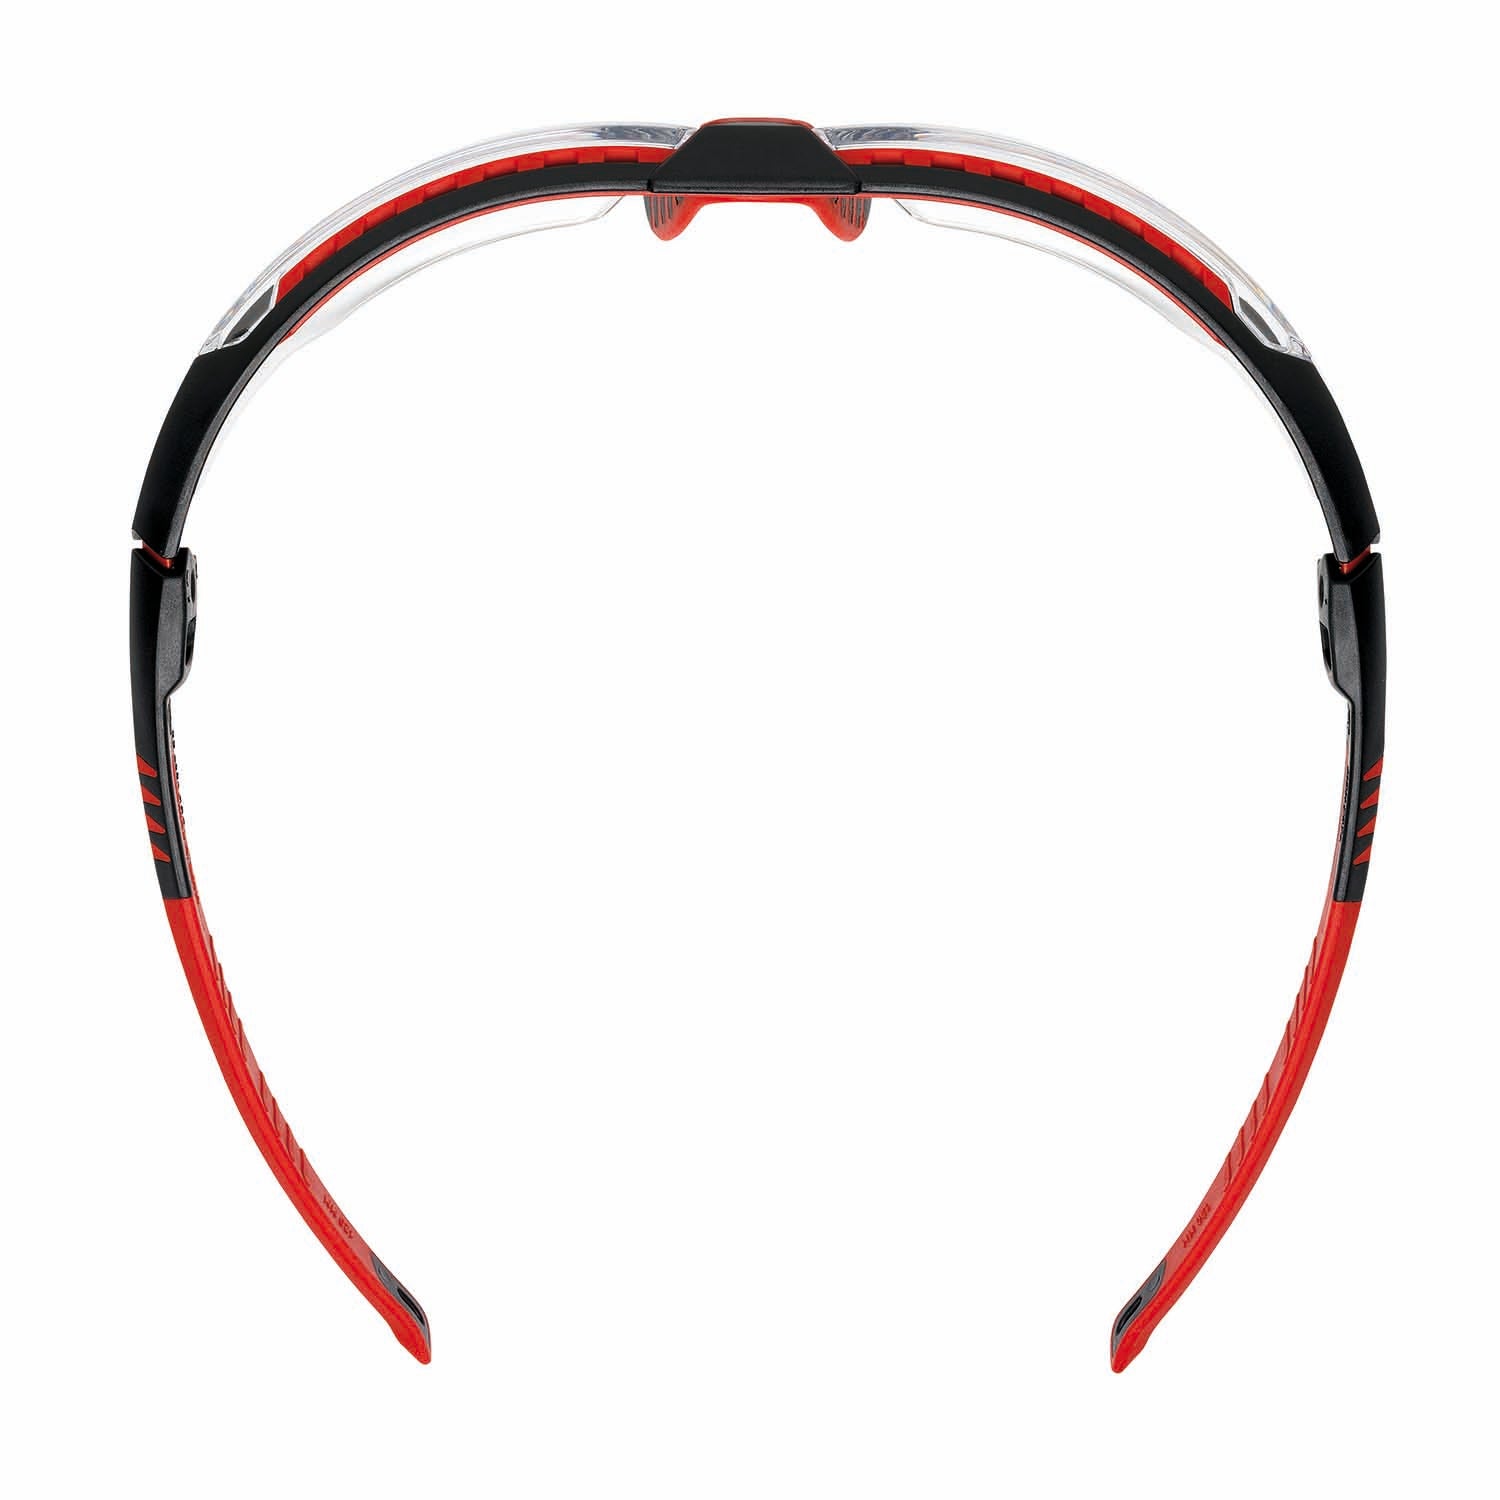 safety spectacles Honeywell avatar clear lens black red frame